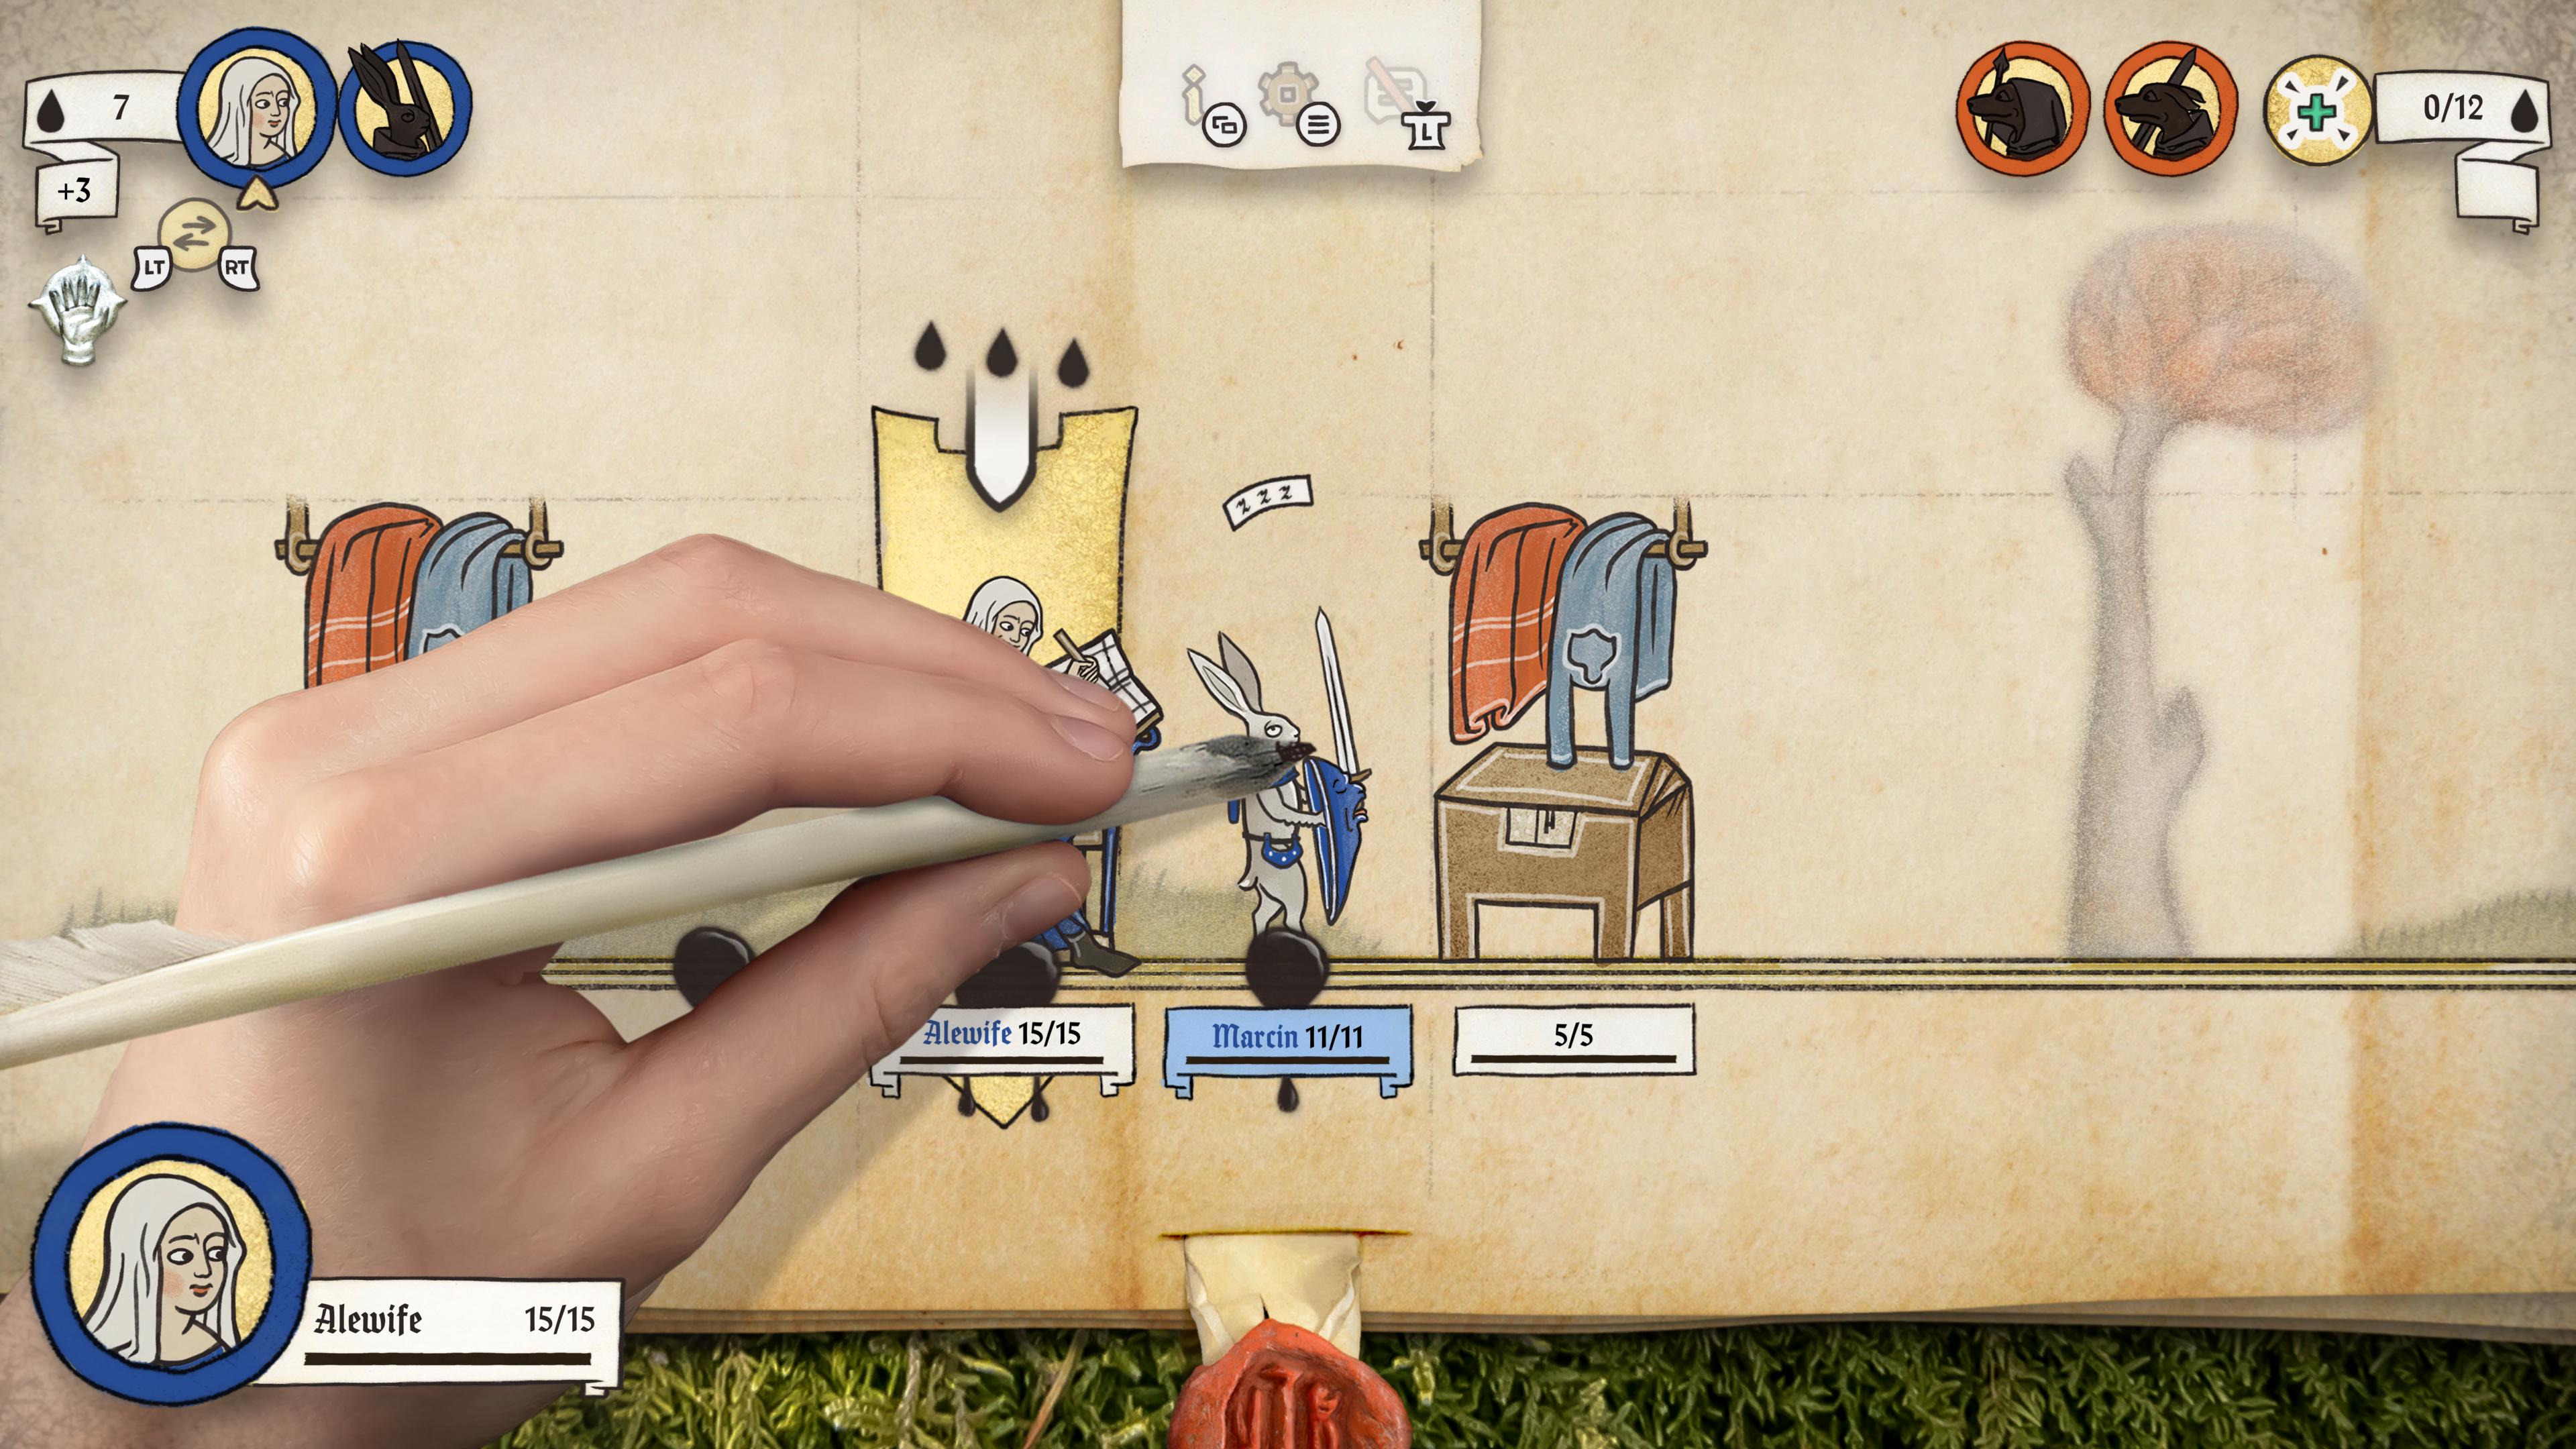 Video game screenshot of a person's hand drawing rabbit soldiers onto a parchment scroll